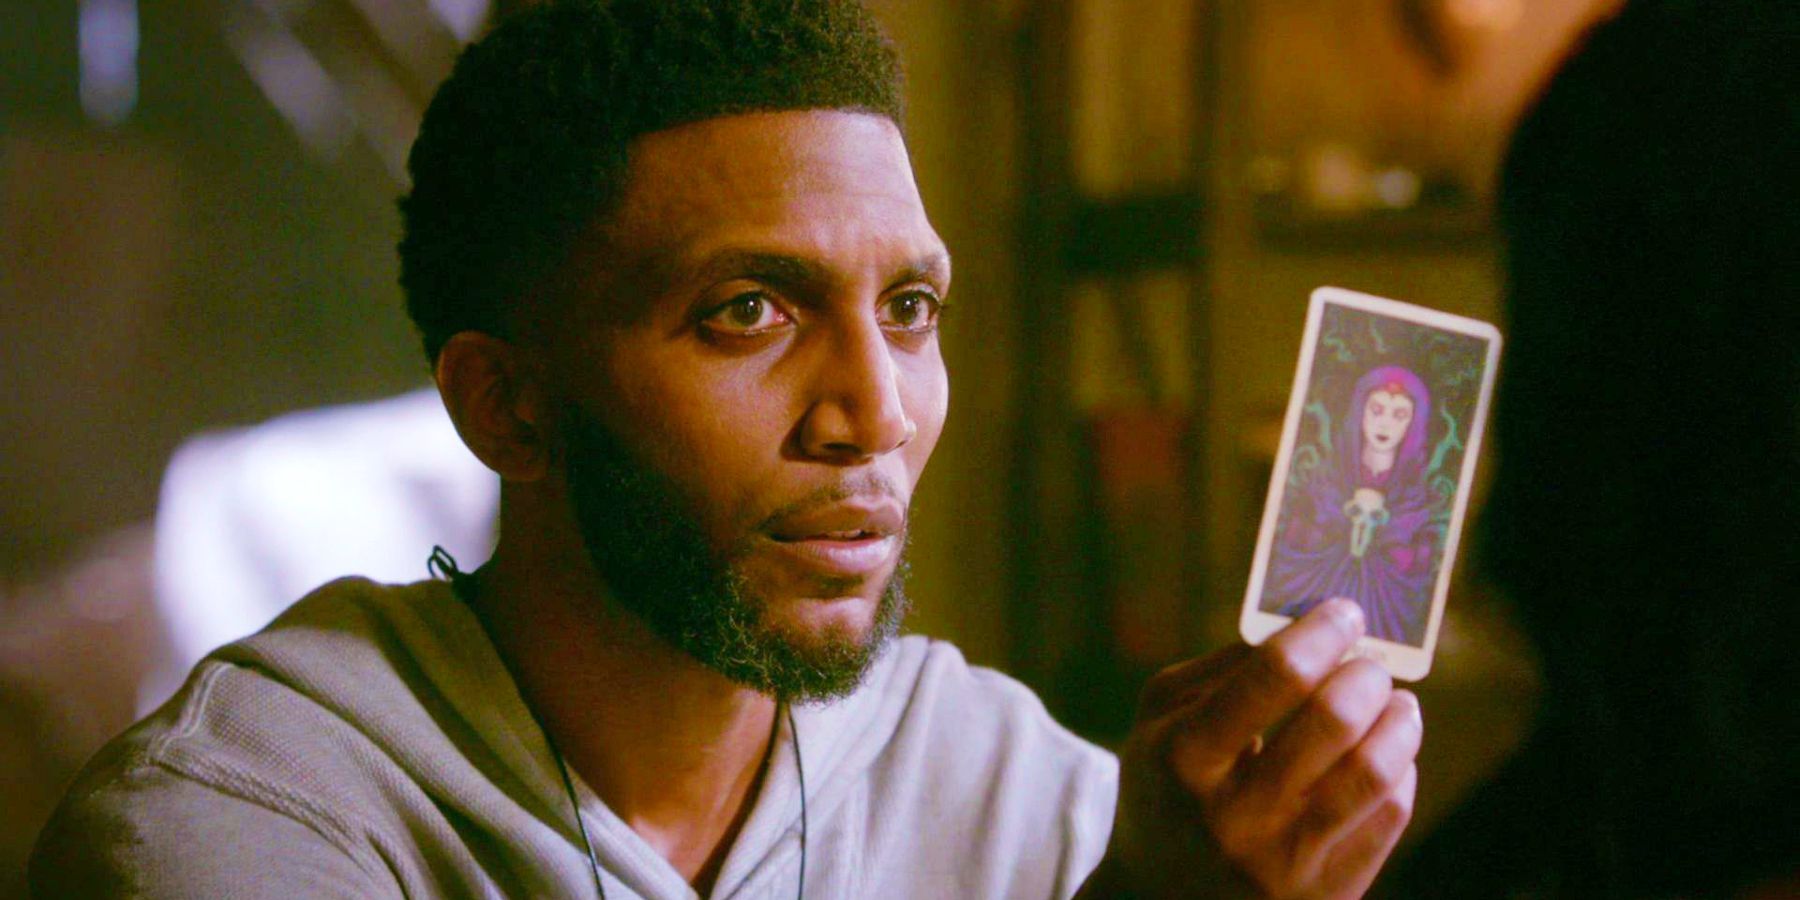 Vincent Griffith holds up a tarot card in The Originals.